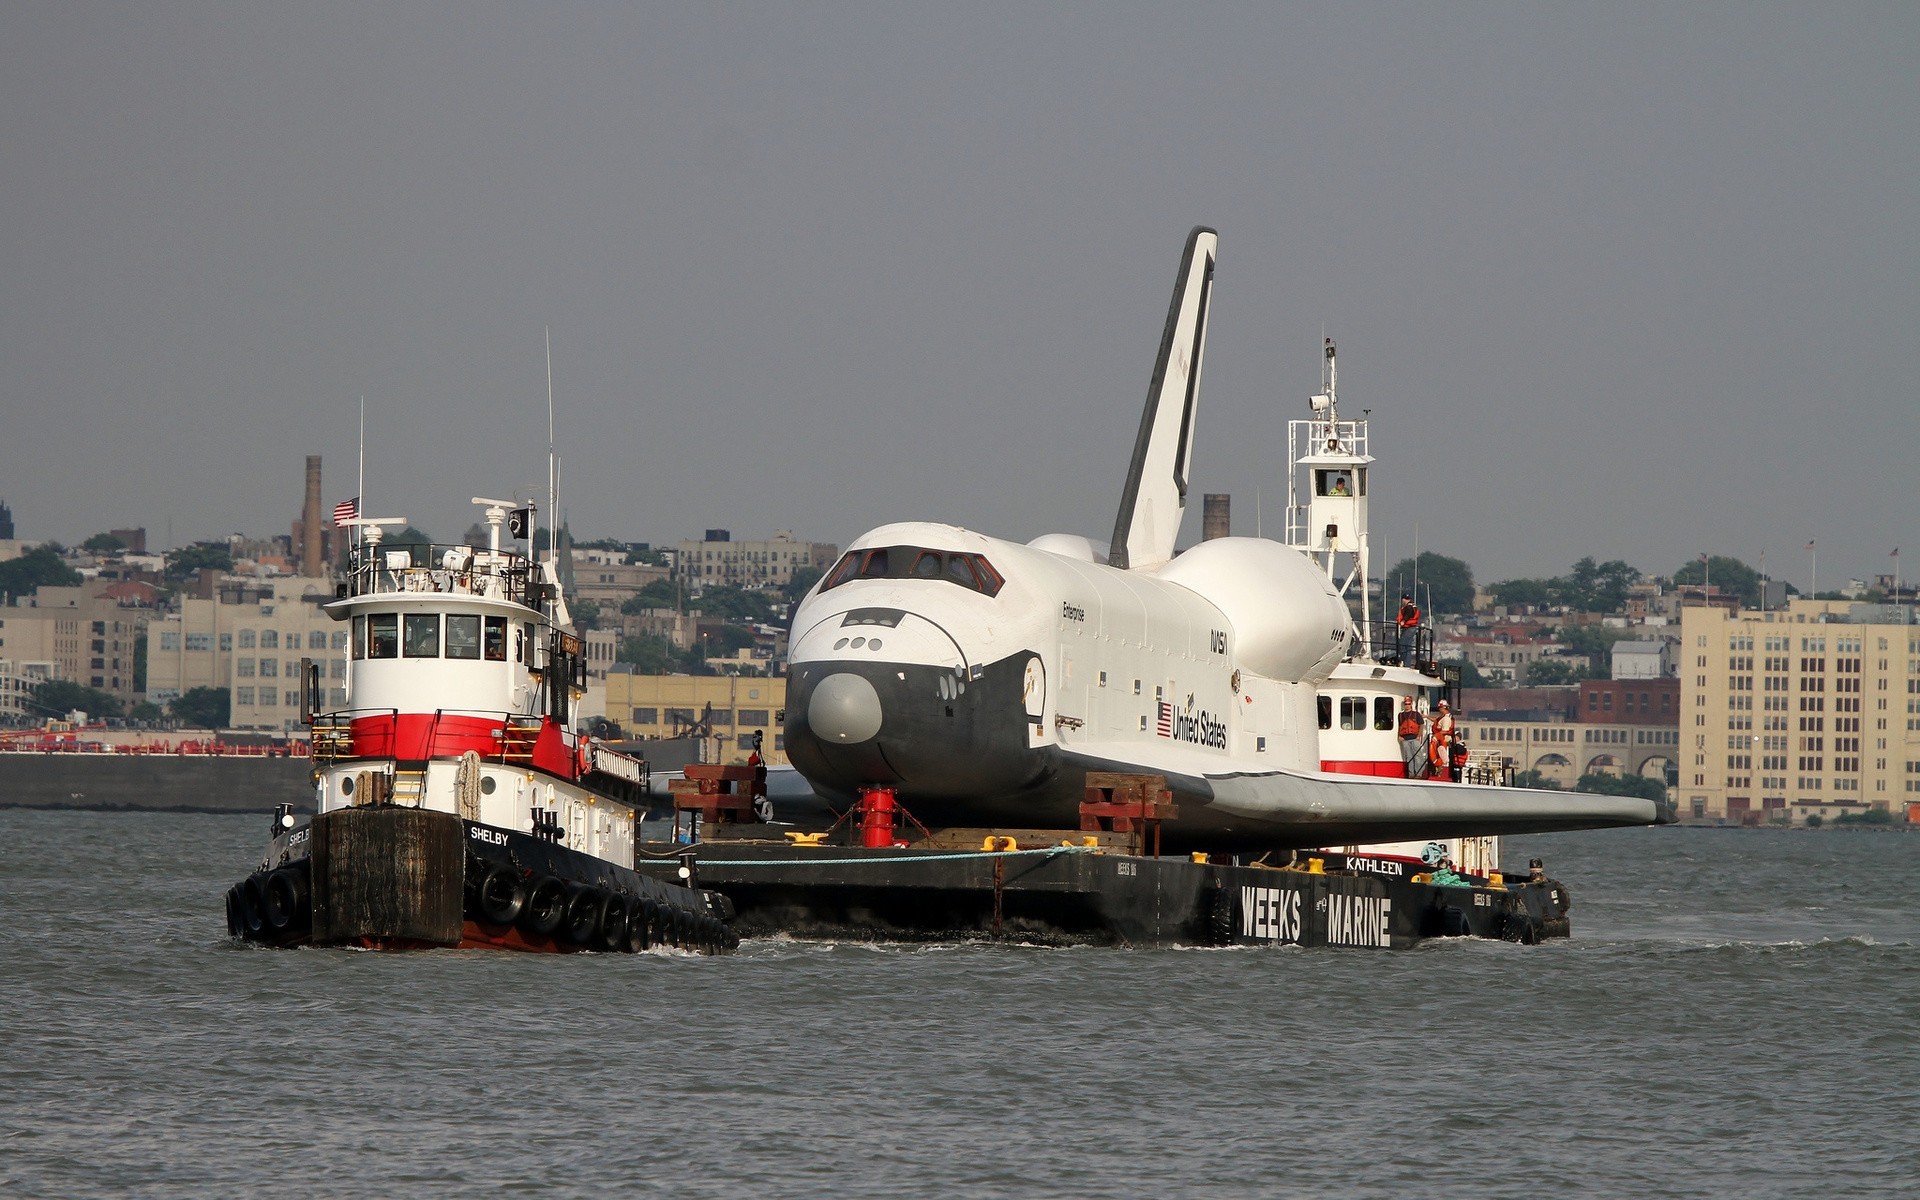 General 1920x1200 space shuttle vehicle water boat tugboat